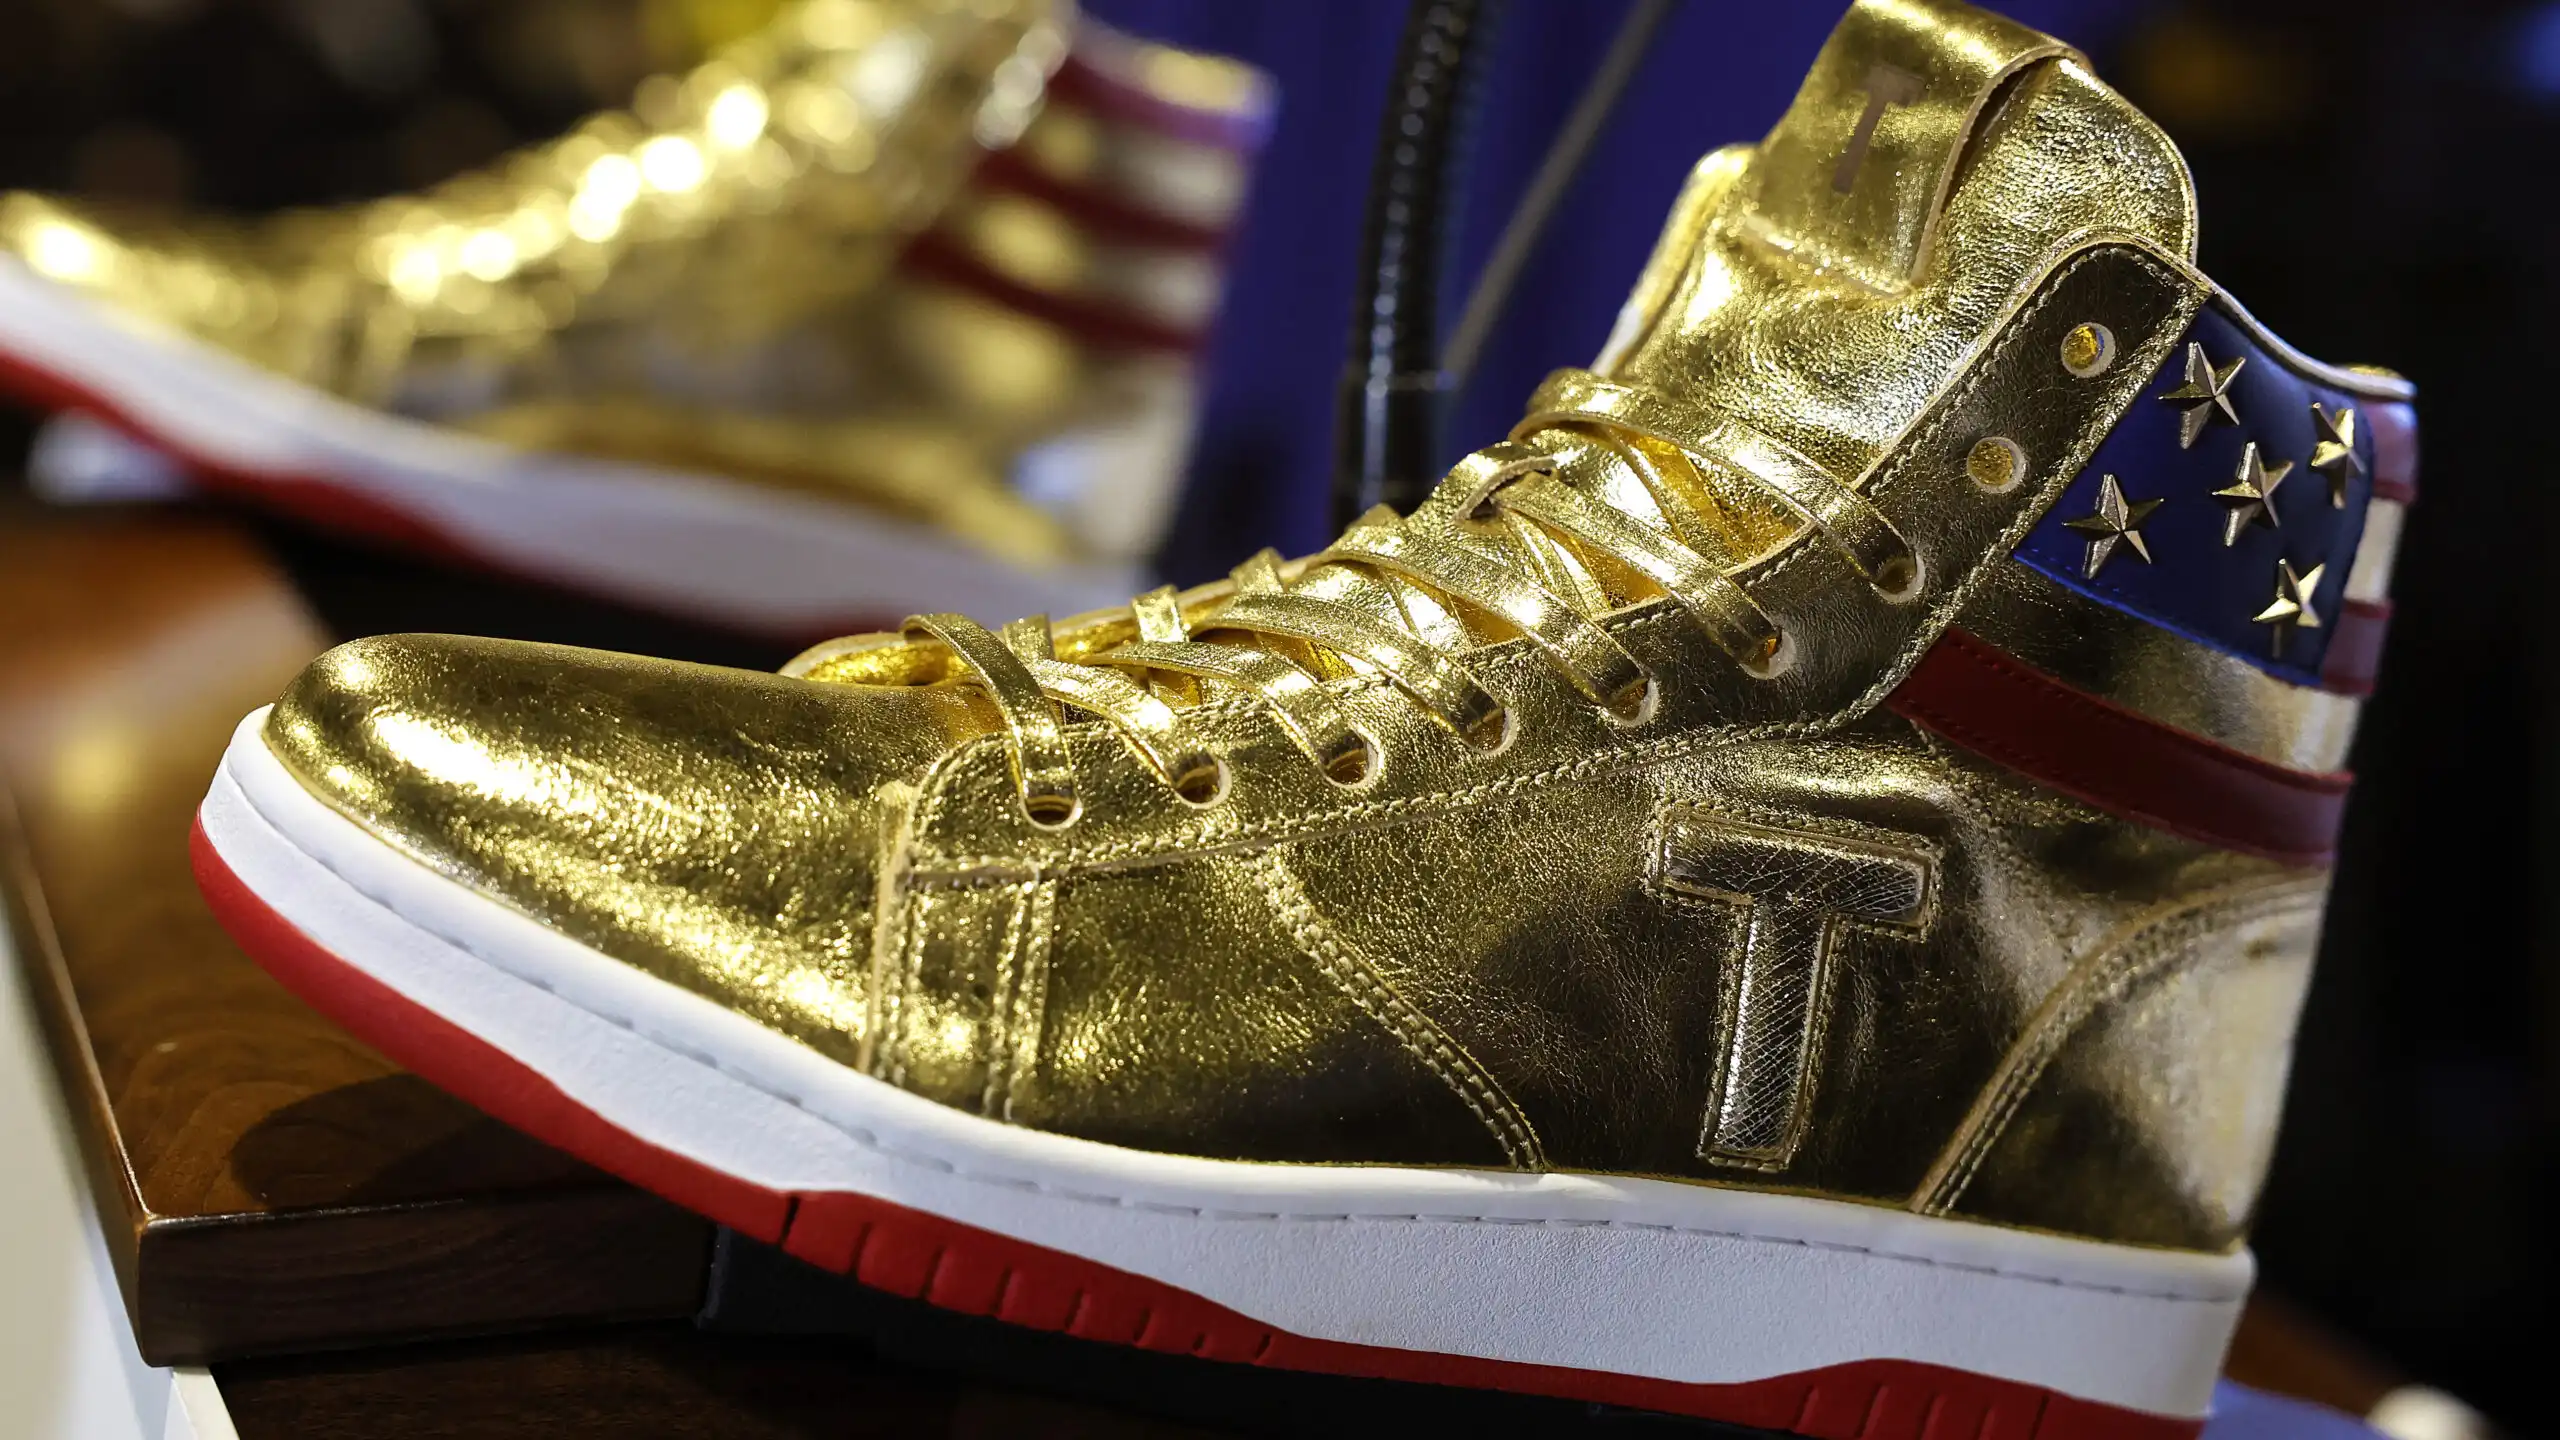 Trump Unveils $400 Trump Shoes At Sneaker Con - Conservative Angle